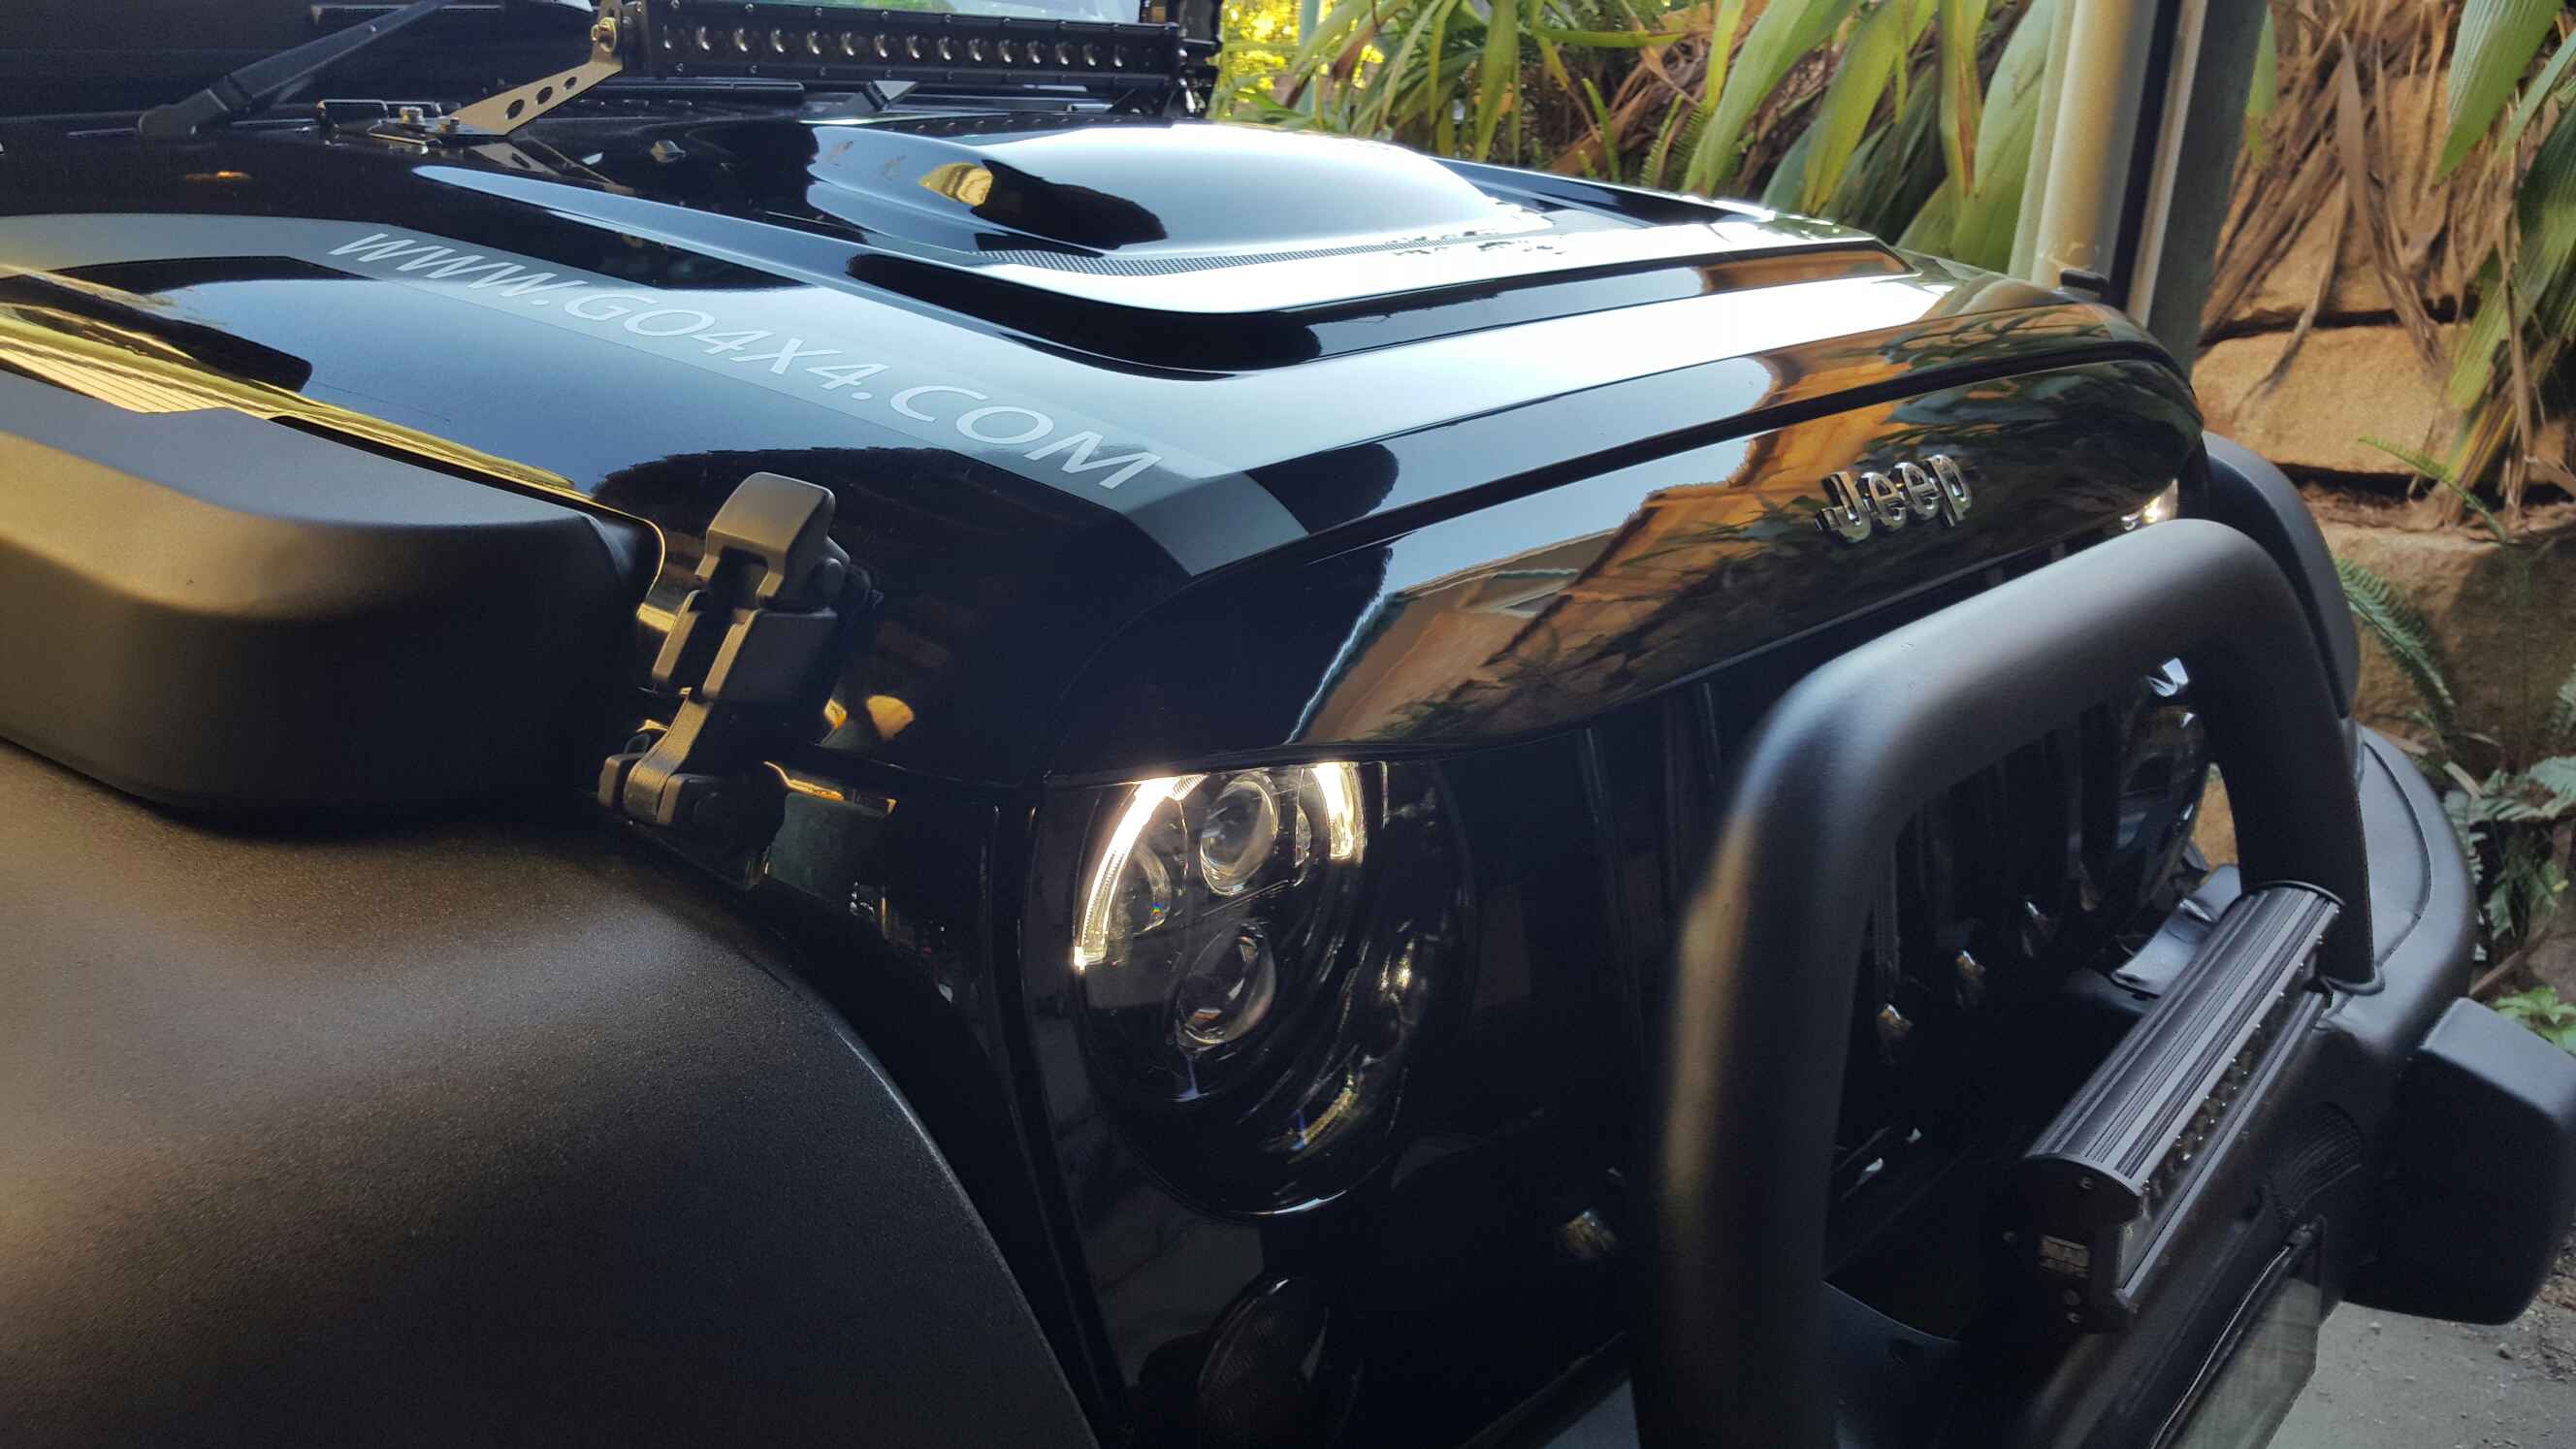 Angry Brow for Jeep Wrangler JK Grille - Mad Jeeps Shop Aftermarket Parts  and Mods